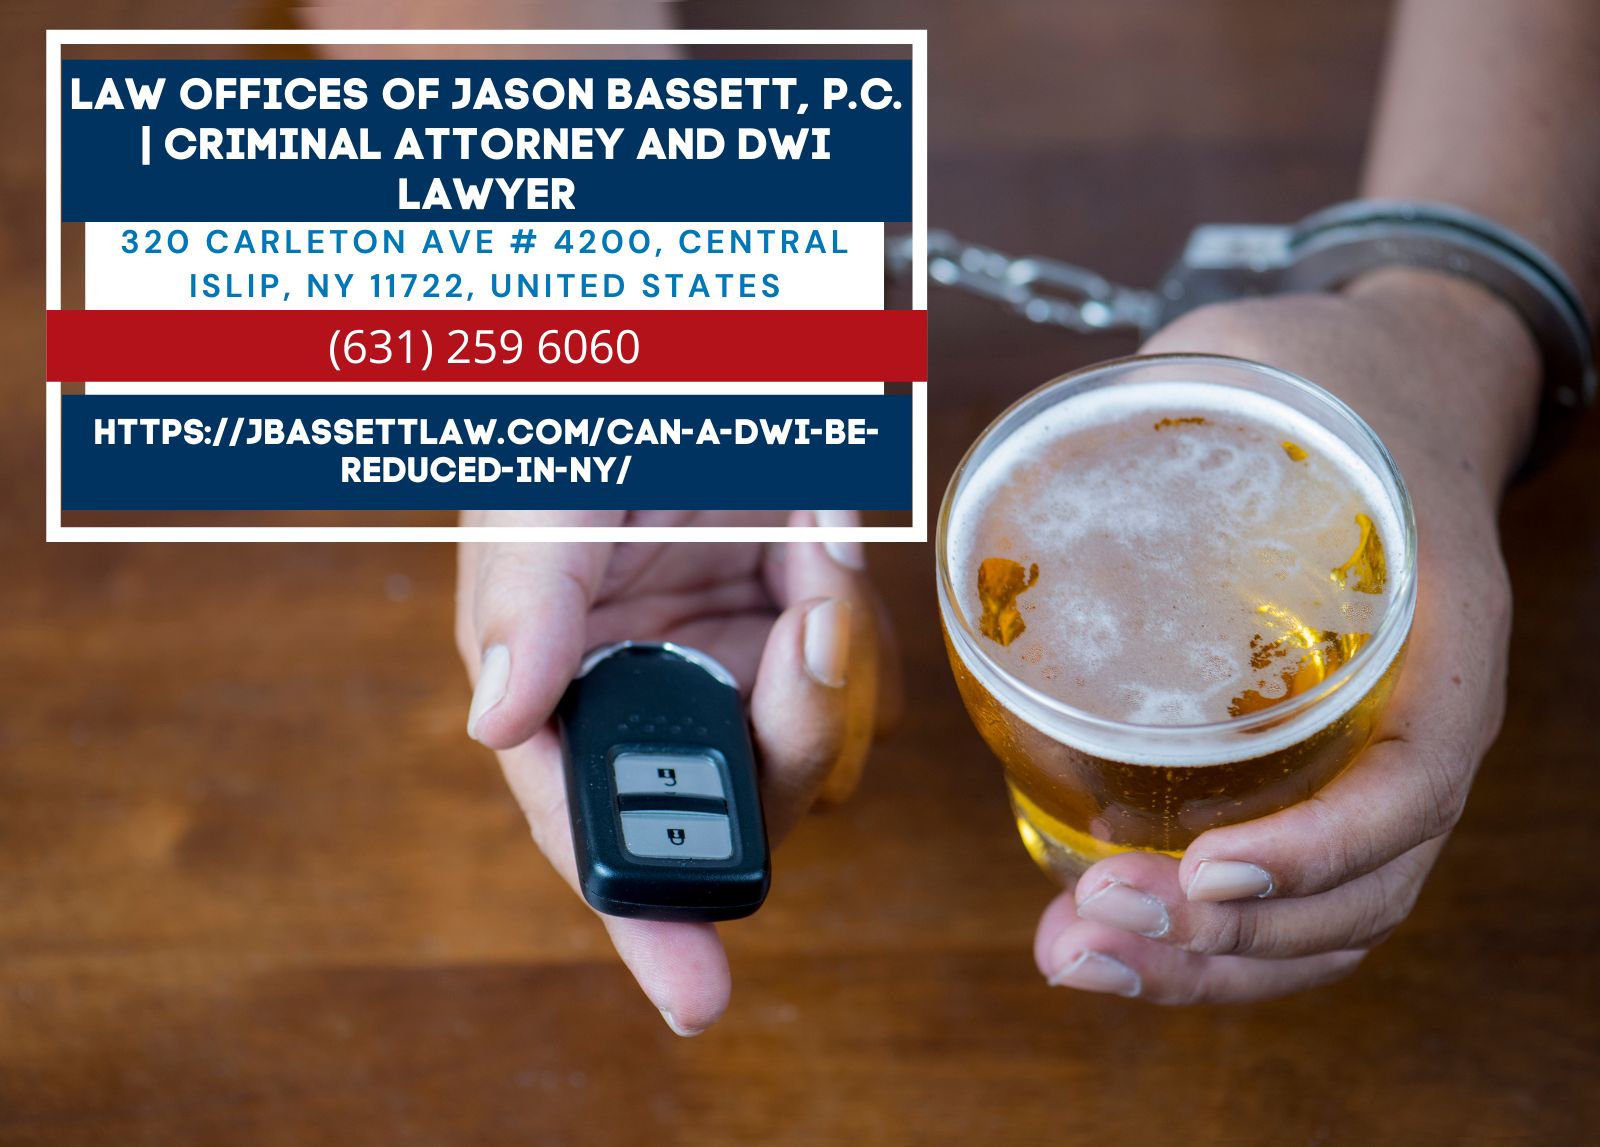 Long Island DWI Lawyer Jason Bassett Releases Informative Article on Reducing DWI Charges in New York